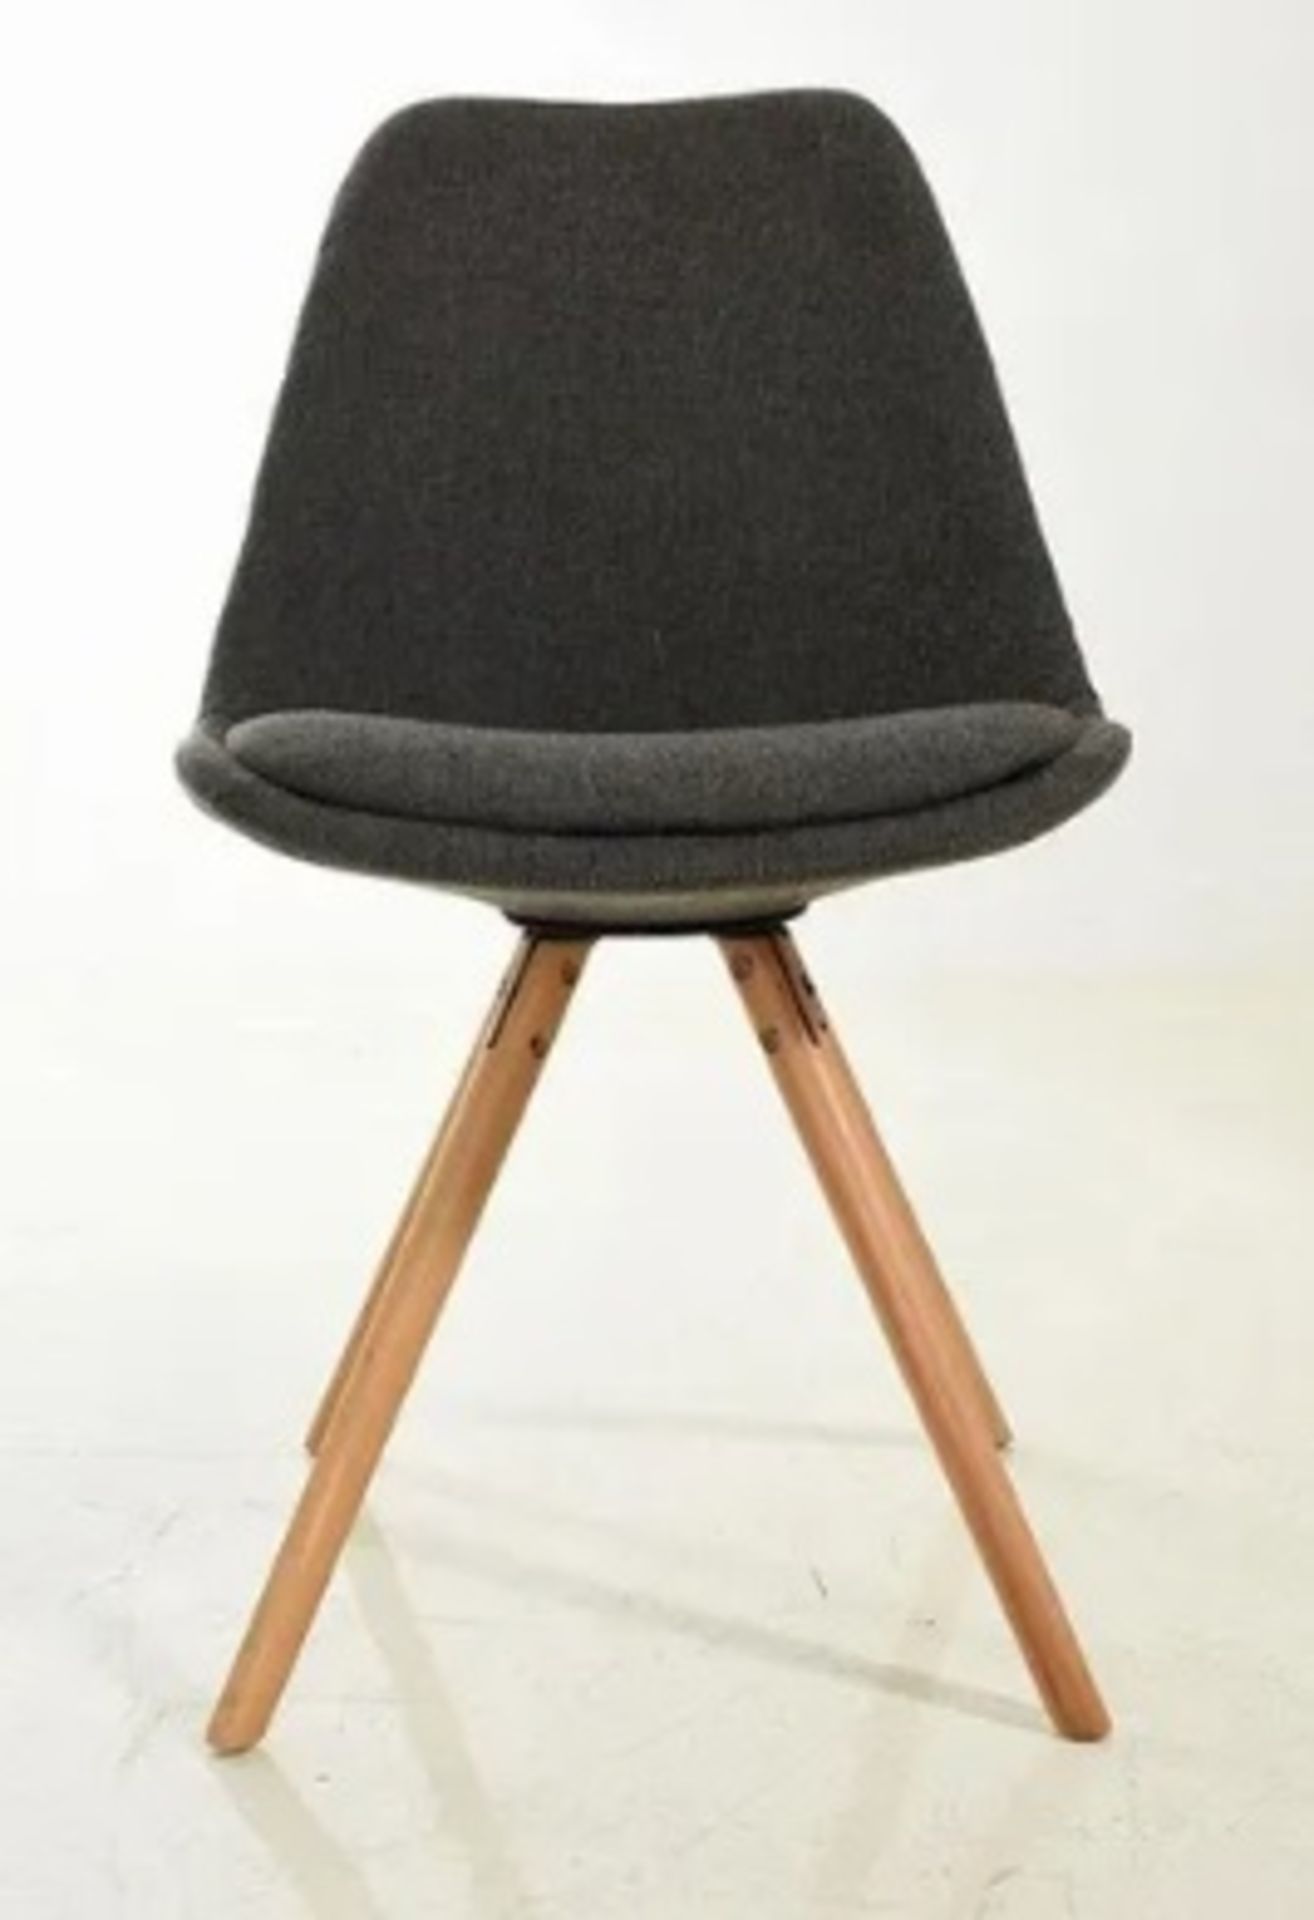 Set of 4 x 'TURNER' Contemporary Scandinavian-style Upholstered Dining Chairs in Grey - Mid - Image 3 of 3